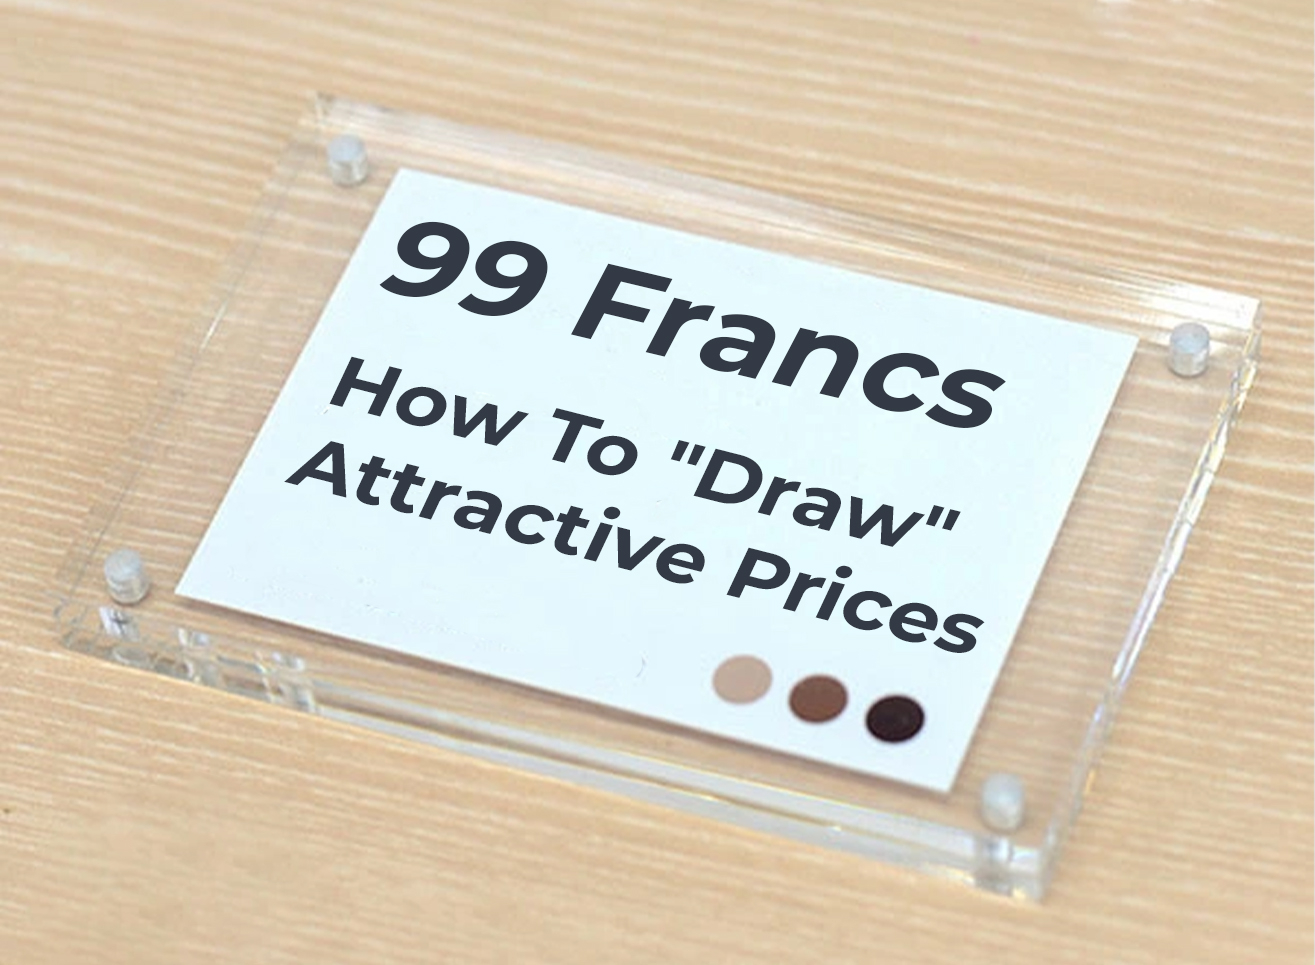 Why "99 francs" is not the best pricing strategy, and how to "draw" attractive prices now